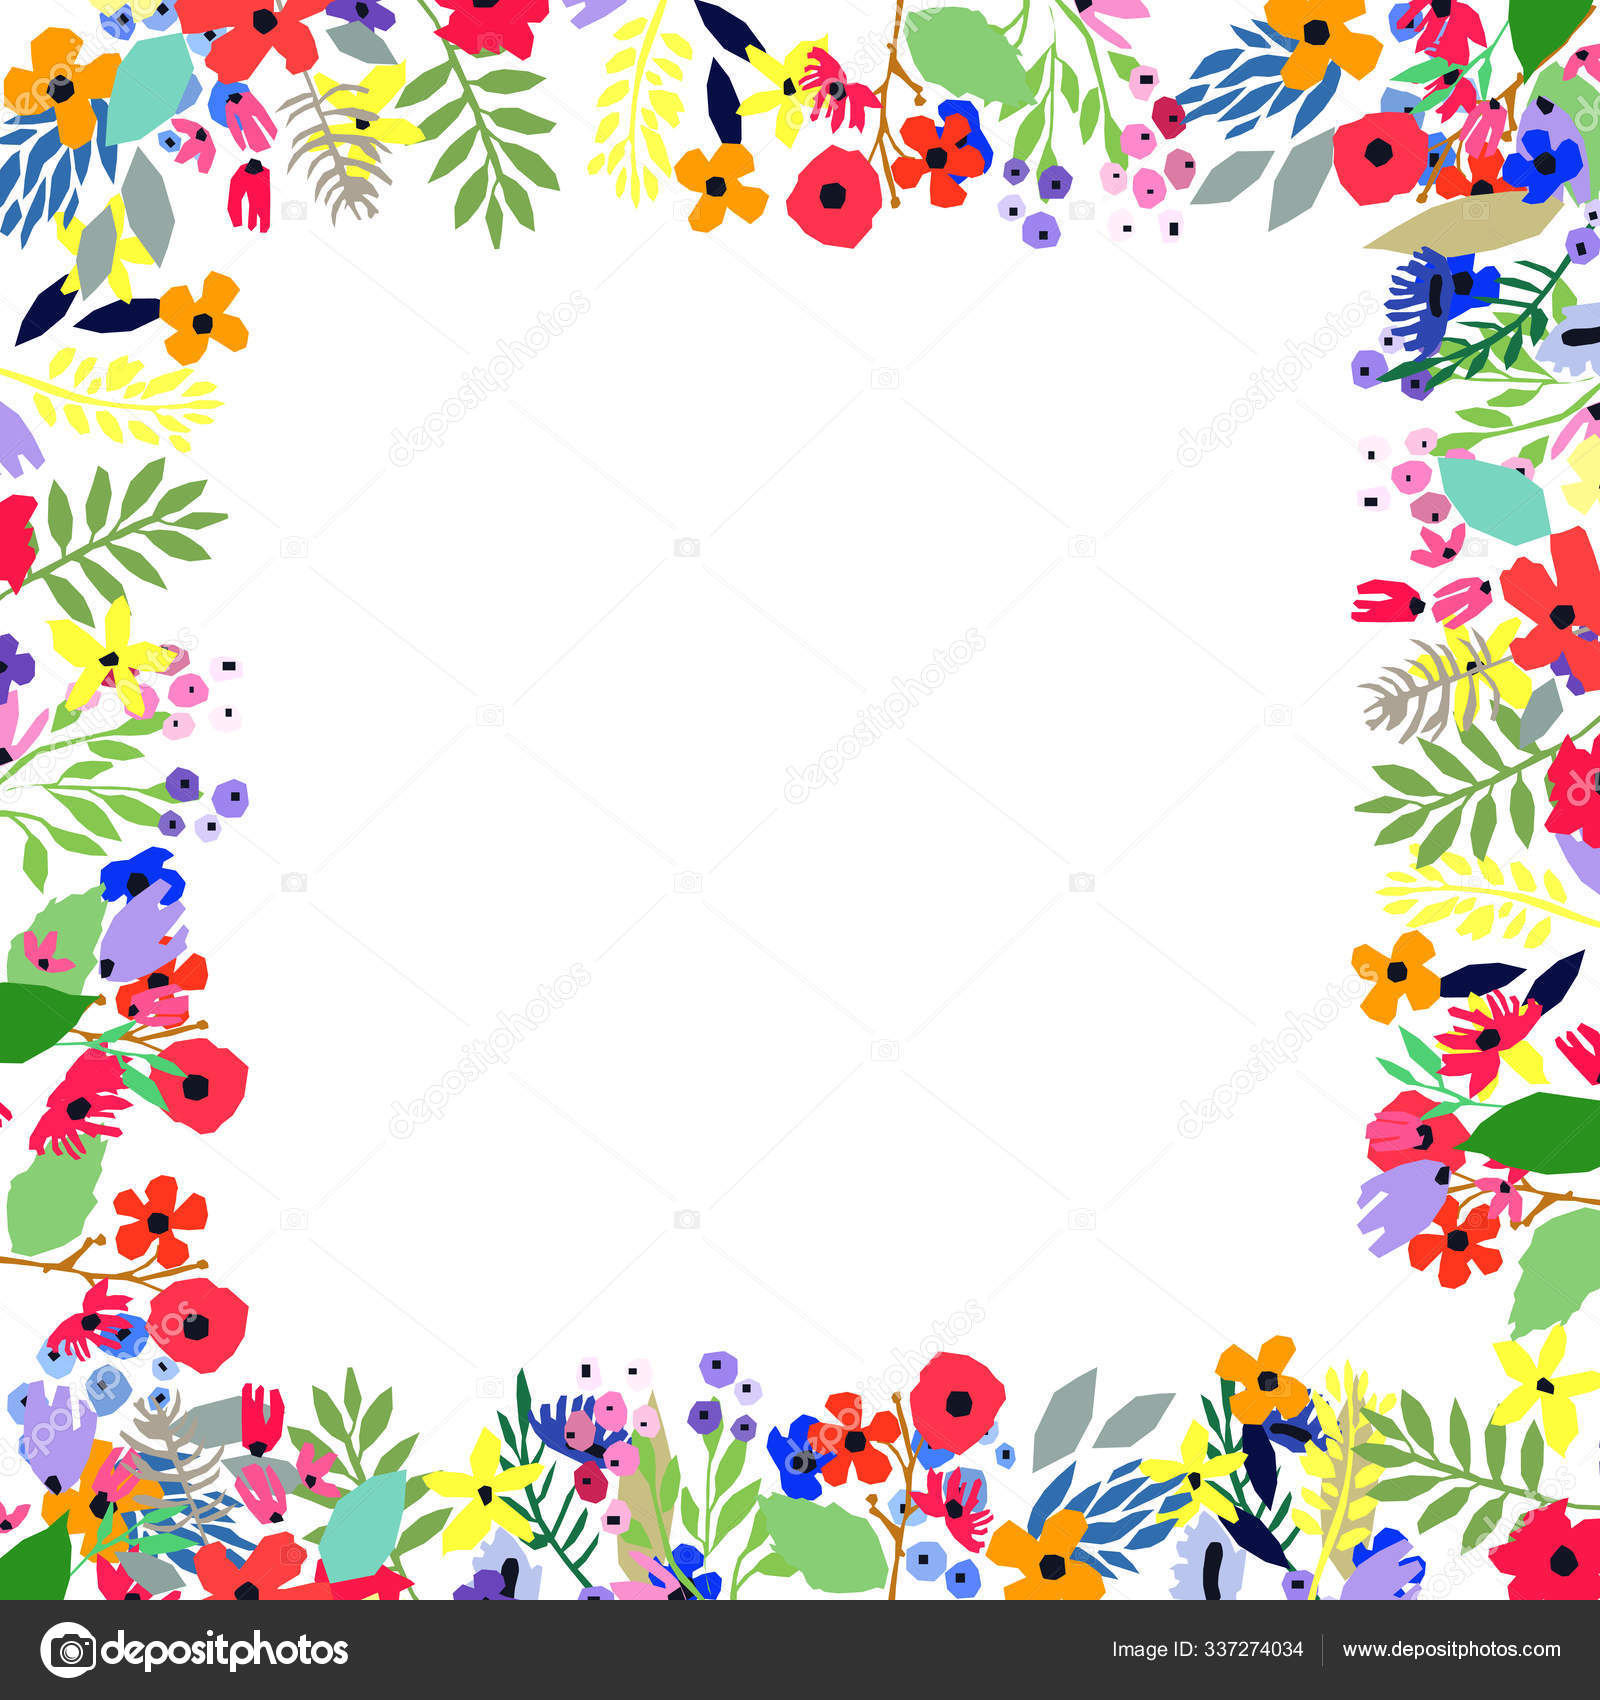 Border With Flowers Leaves And Branches Floral Frame Stock